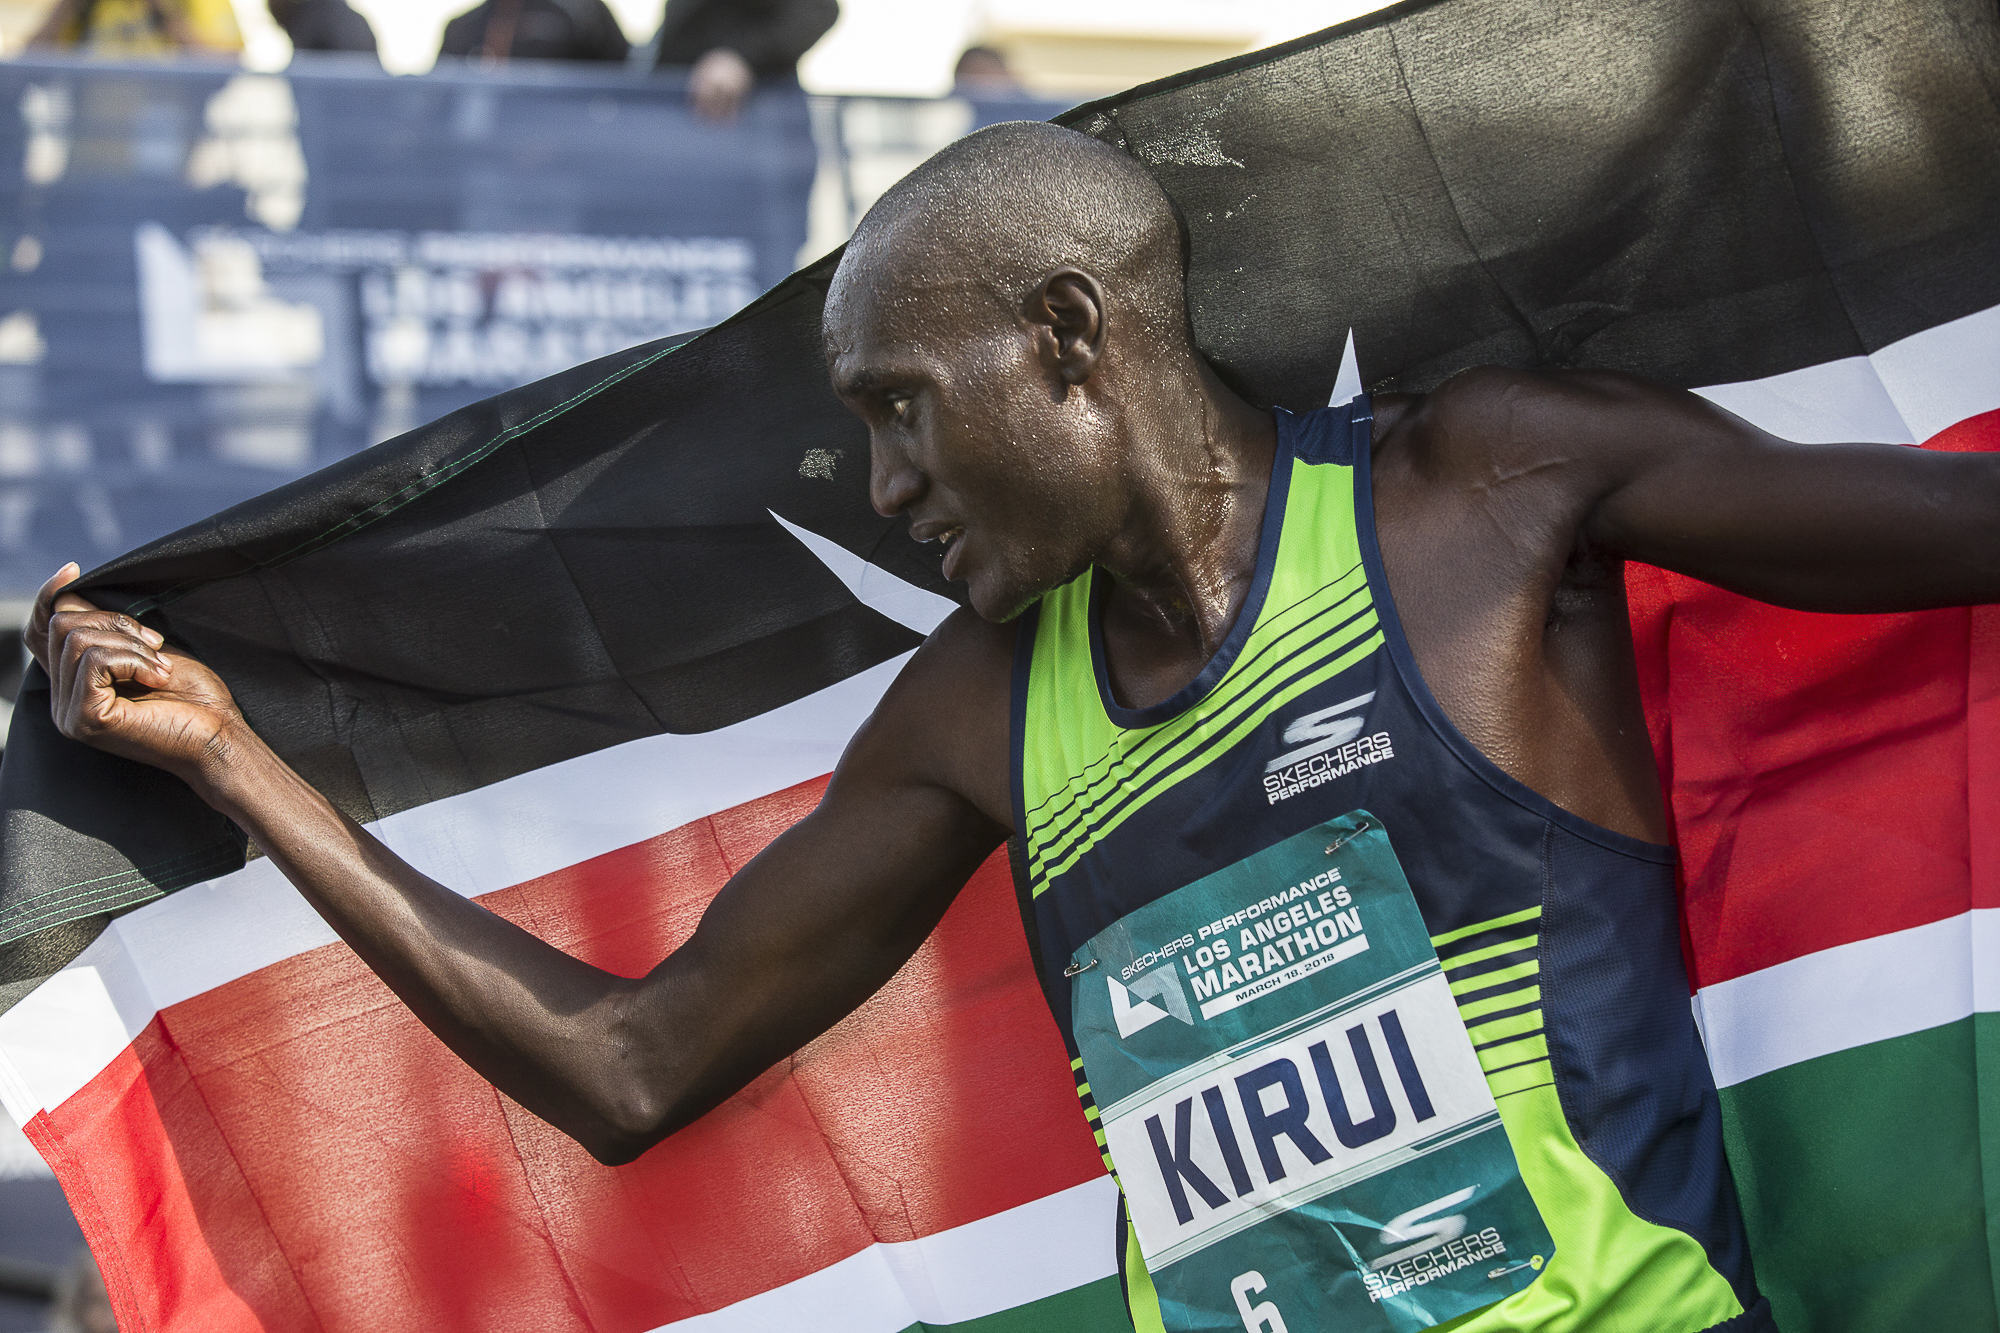  Weldon Kirui proudly holds the flag of his native country Kenya over himself after winning the 33rd annual Los Angeles Marathon on March 18, 2018 in Santa Monica, California with a time of 2:11:48. Kirui has won 2 out of the last 3 Los Angeles Marat